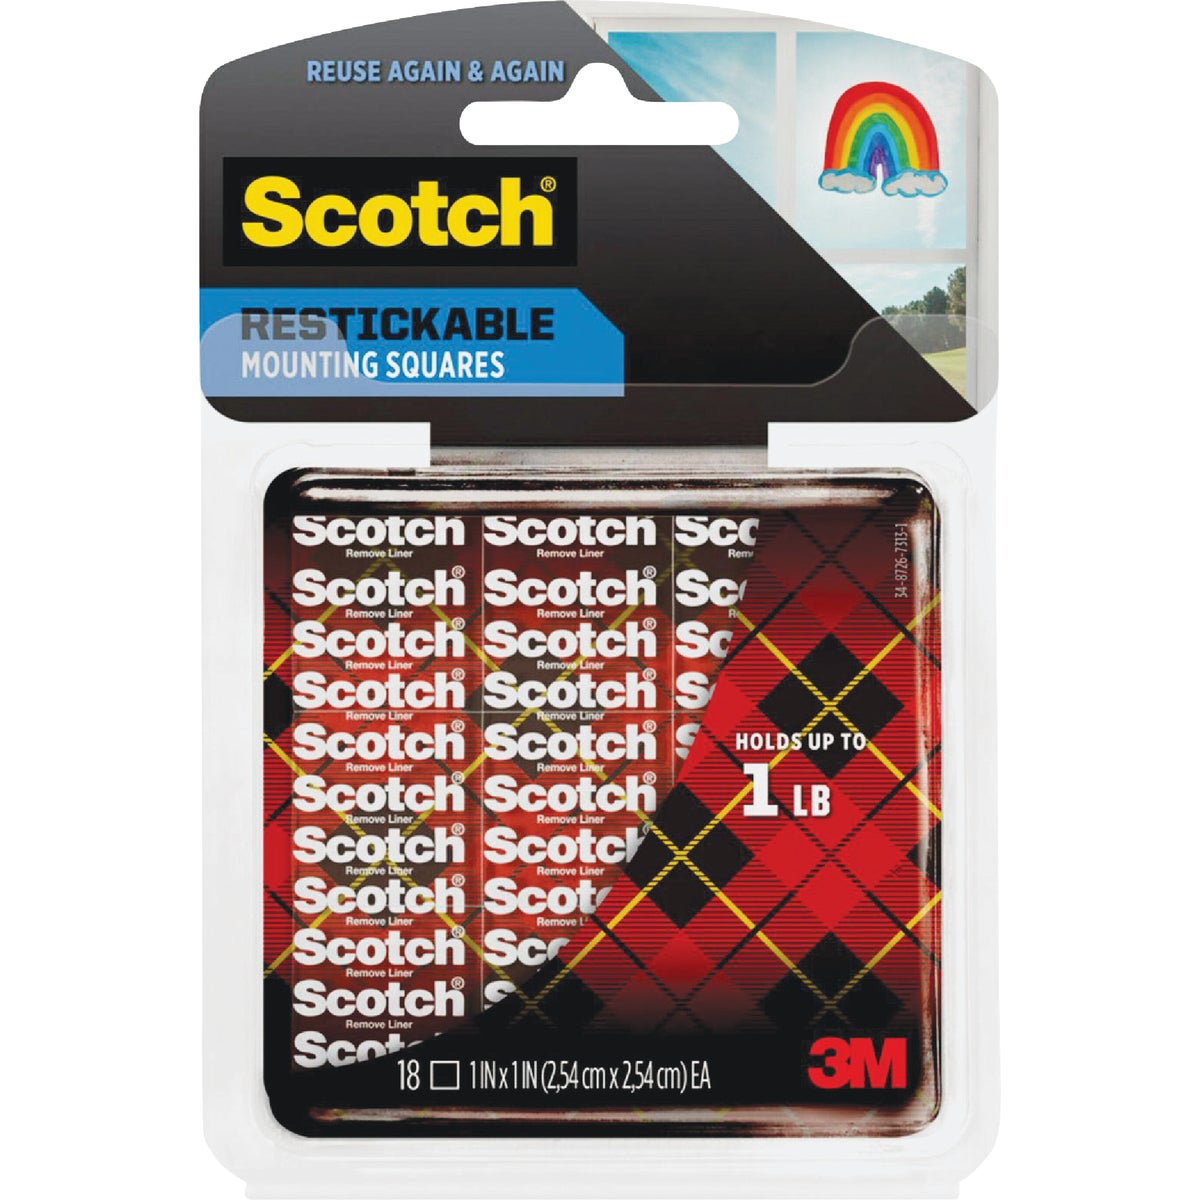 Item 238558, Reinvent your dcor again and again with Scotch Restickable Mounting Squares